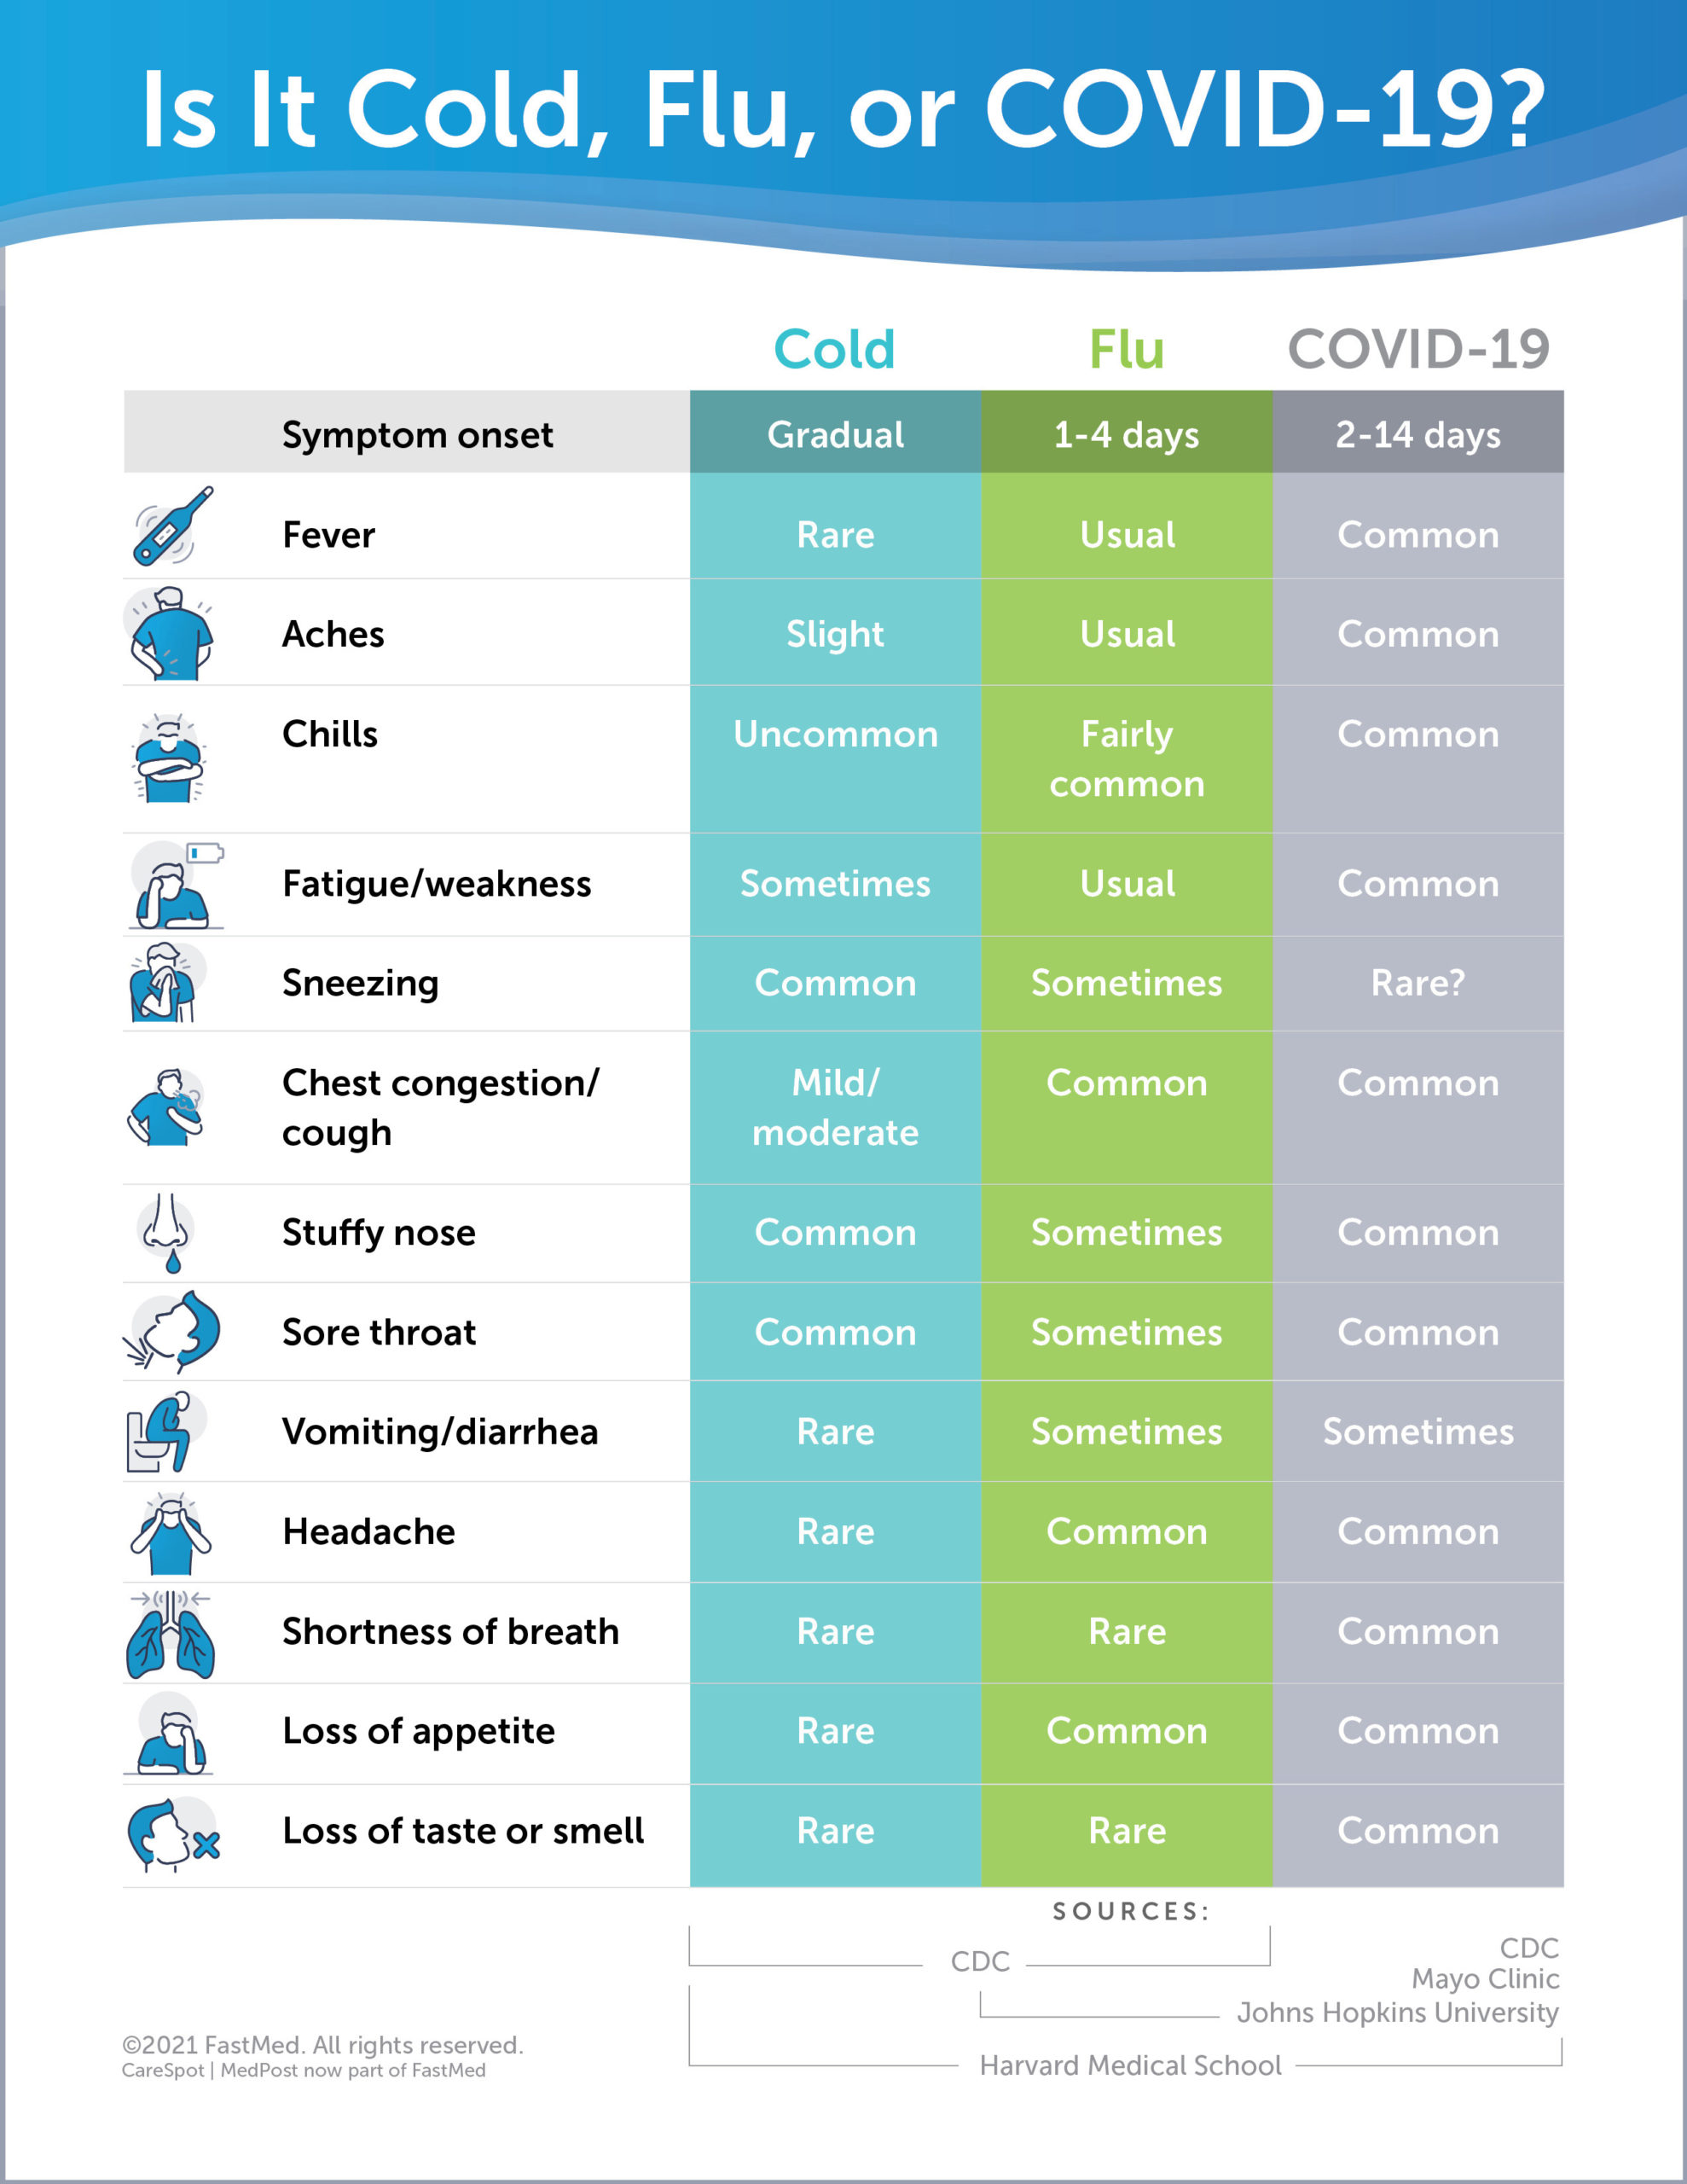 COVID-19 vs. Flu and Colds: Should You Get Tested?